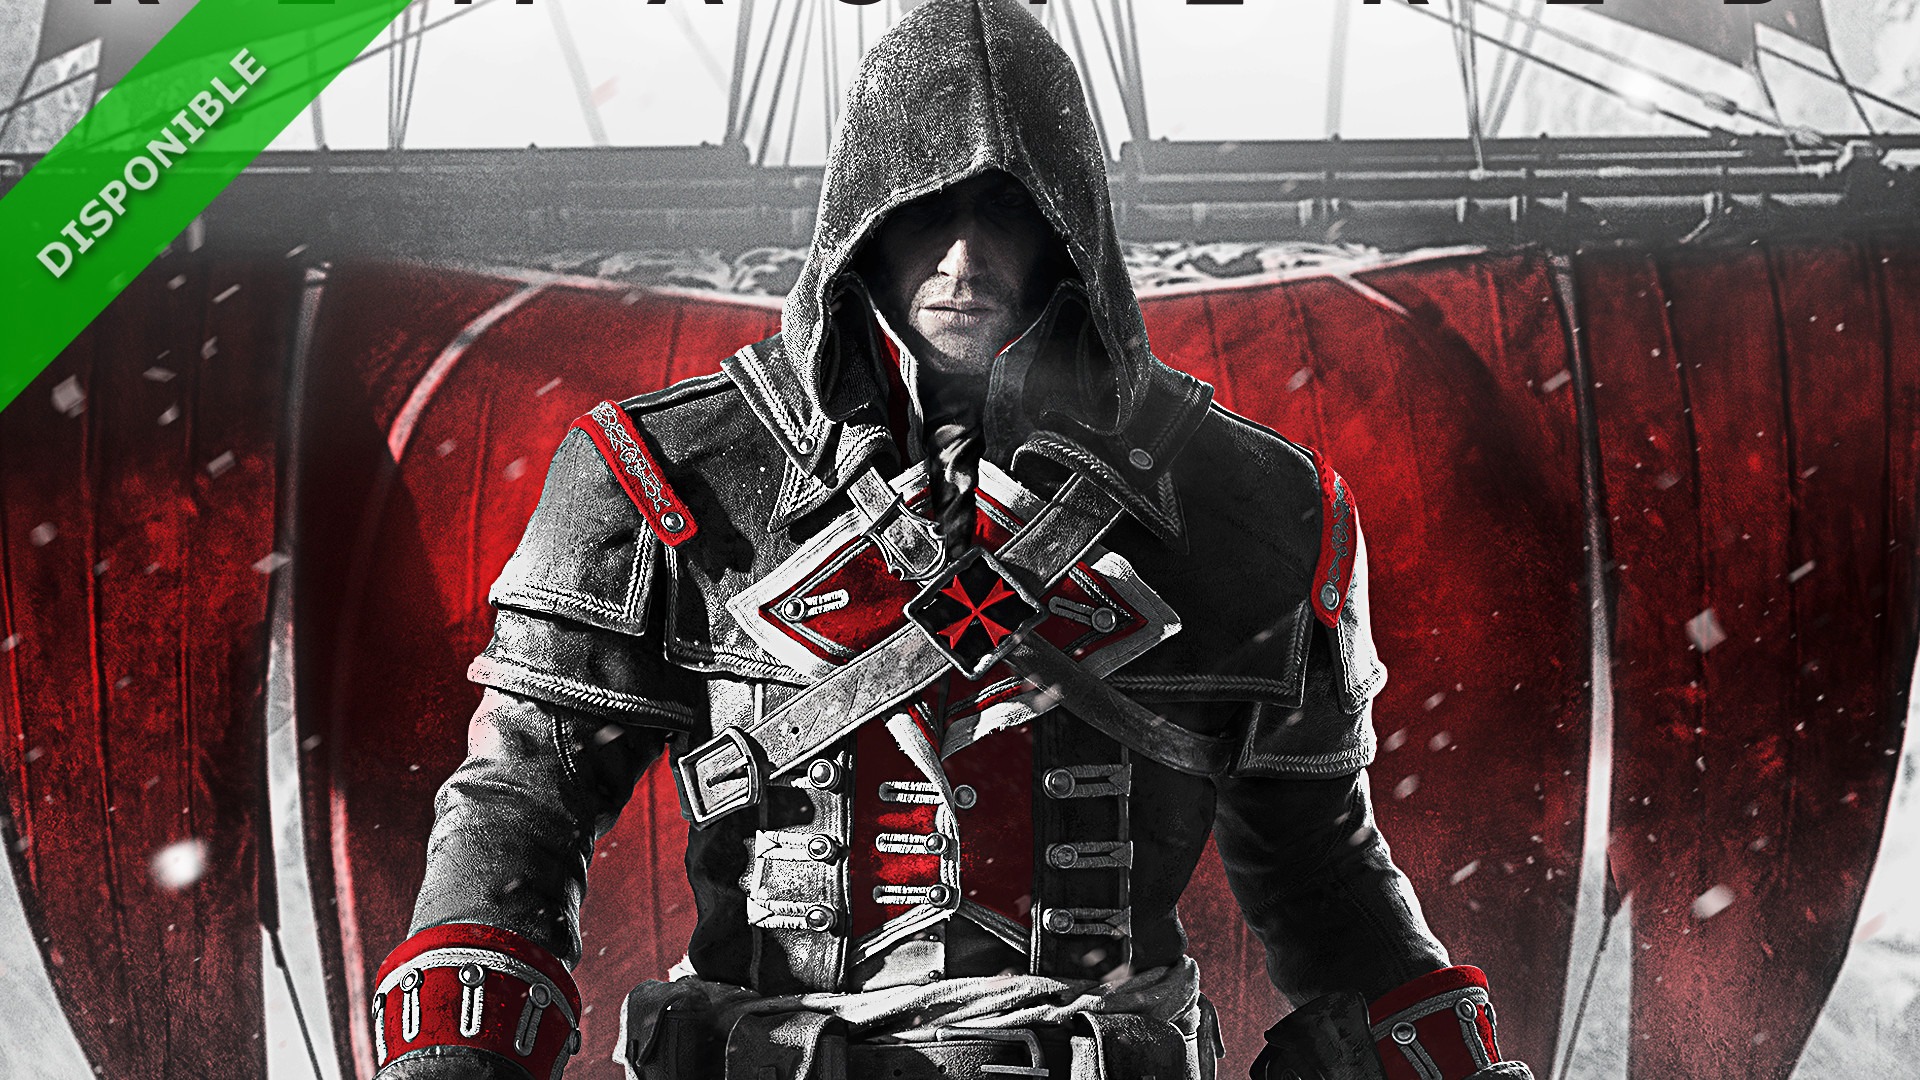 assassins creed rogue deluxe